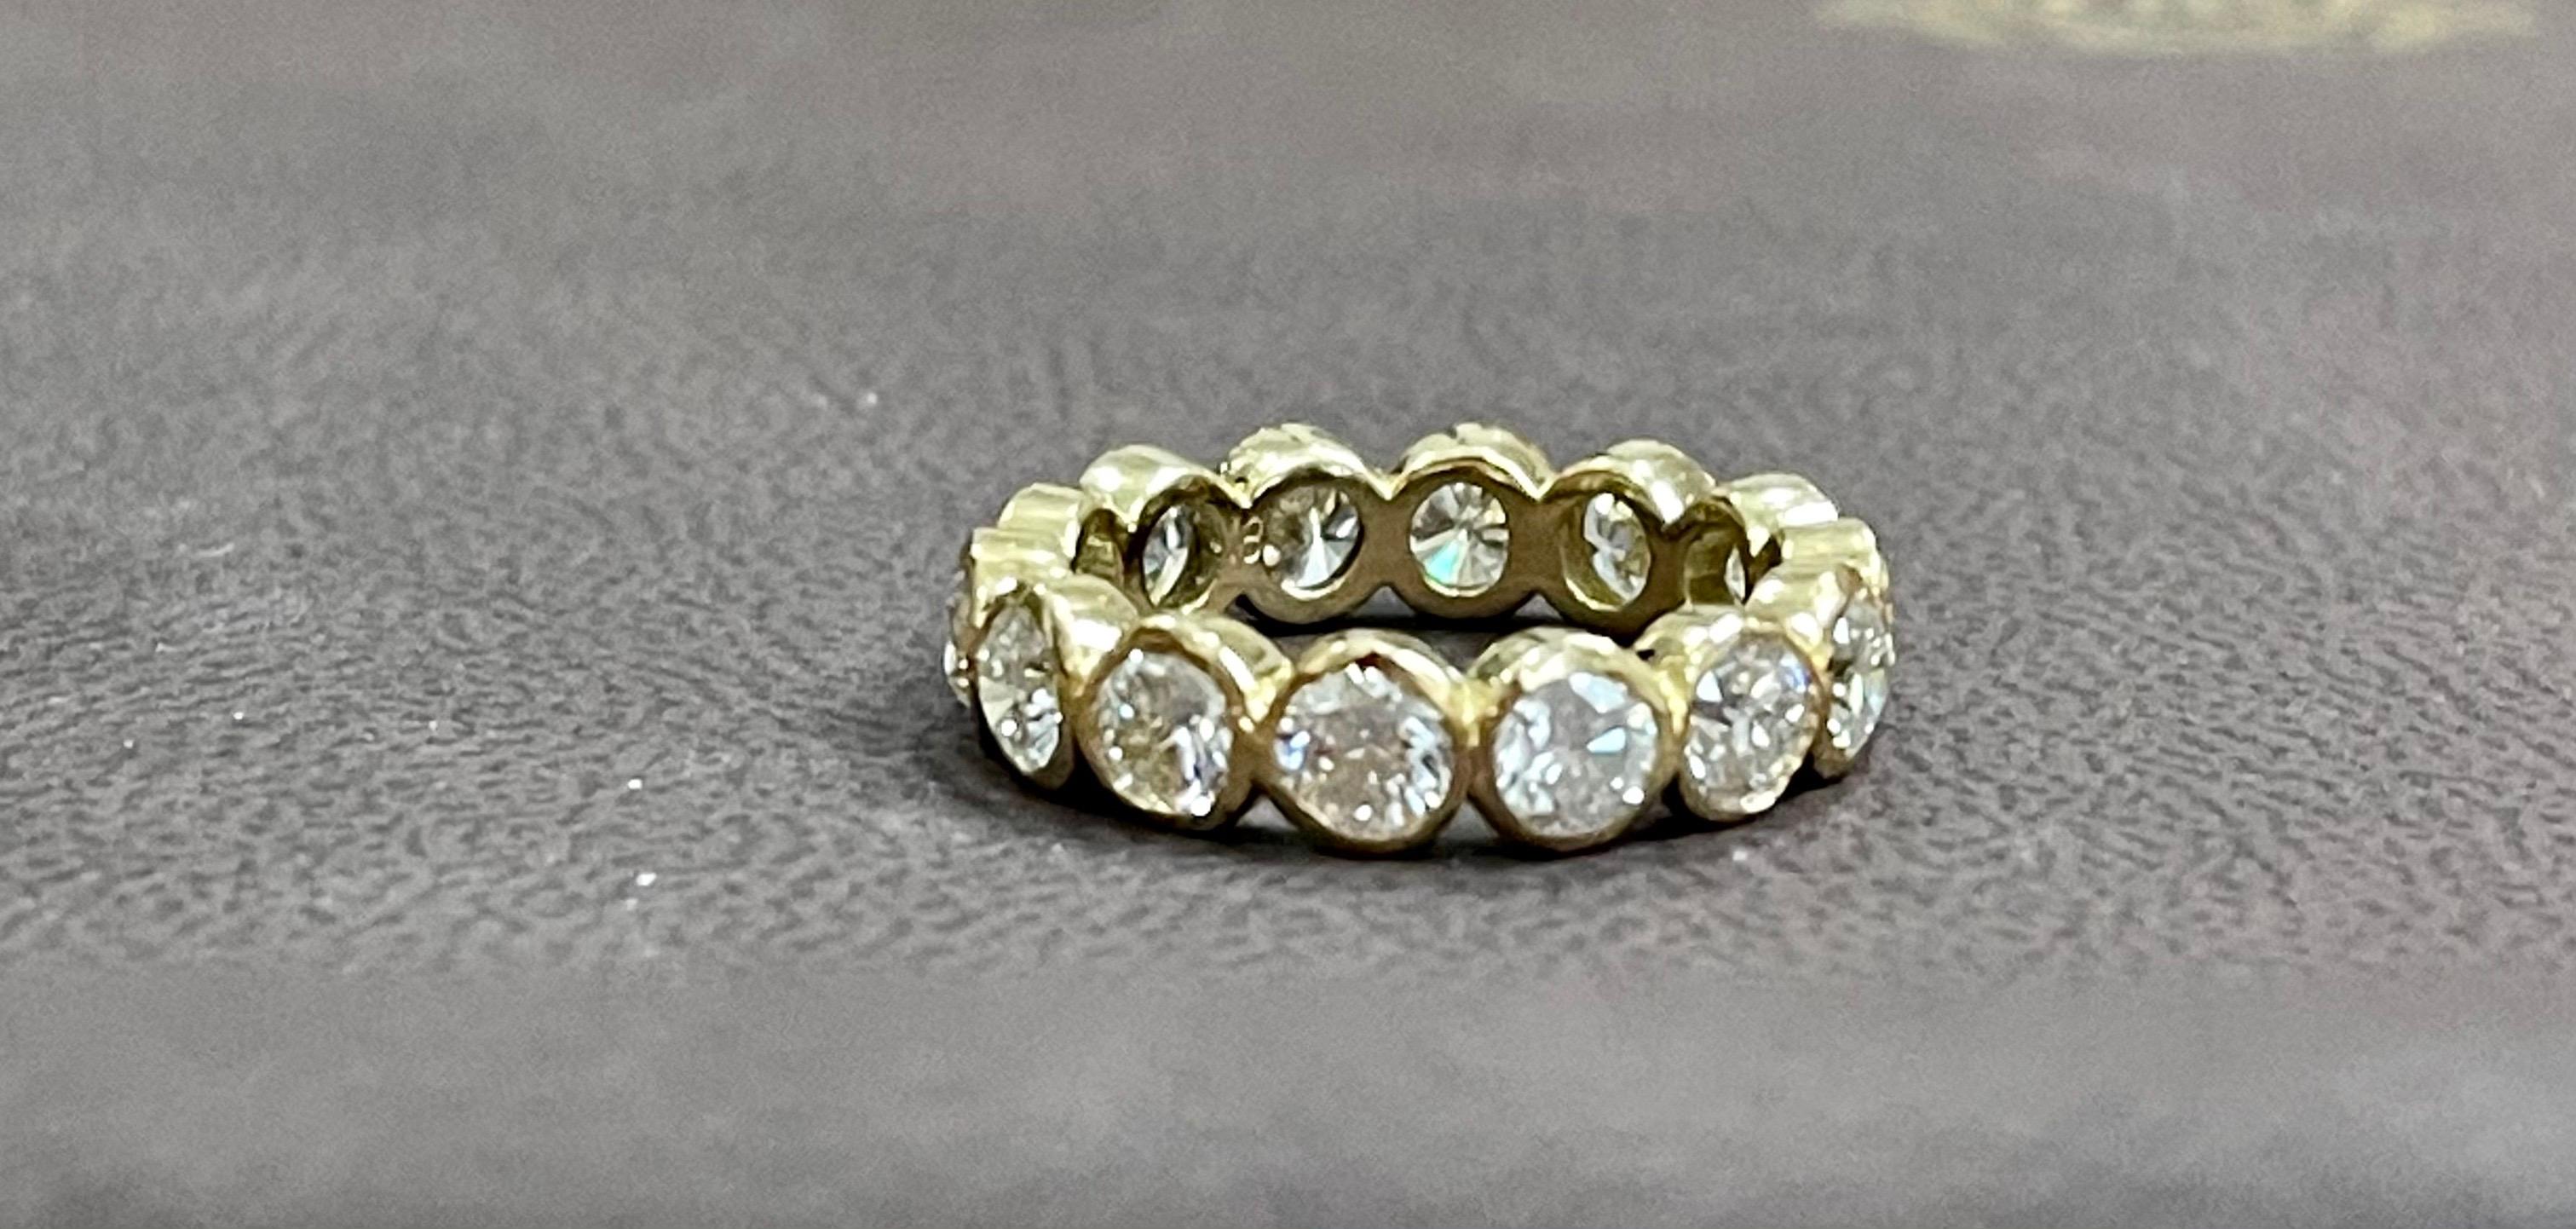 
25 Pointer Each 3.50 Carat  Total Diamond weight  Anniversary Eternity  Band / Ring  14KYG 
Full Bezel set diamond eternity ring set all around with matching 100% natural diamonds in hand-polished solid Yellow Gold 

Diamond VS quality and G/H